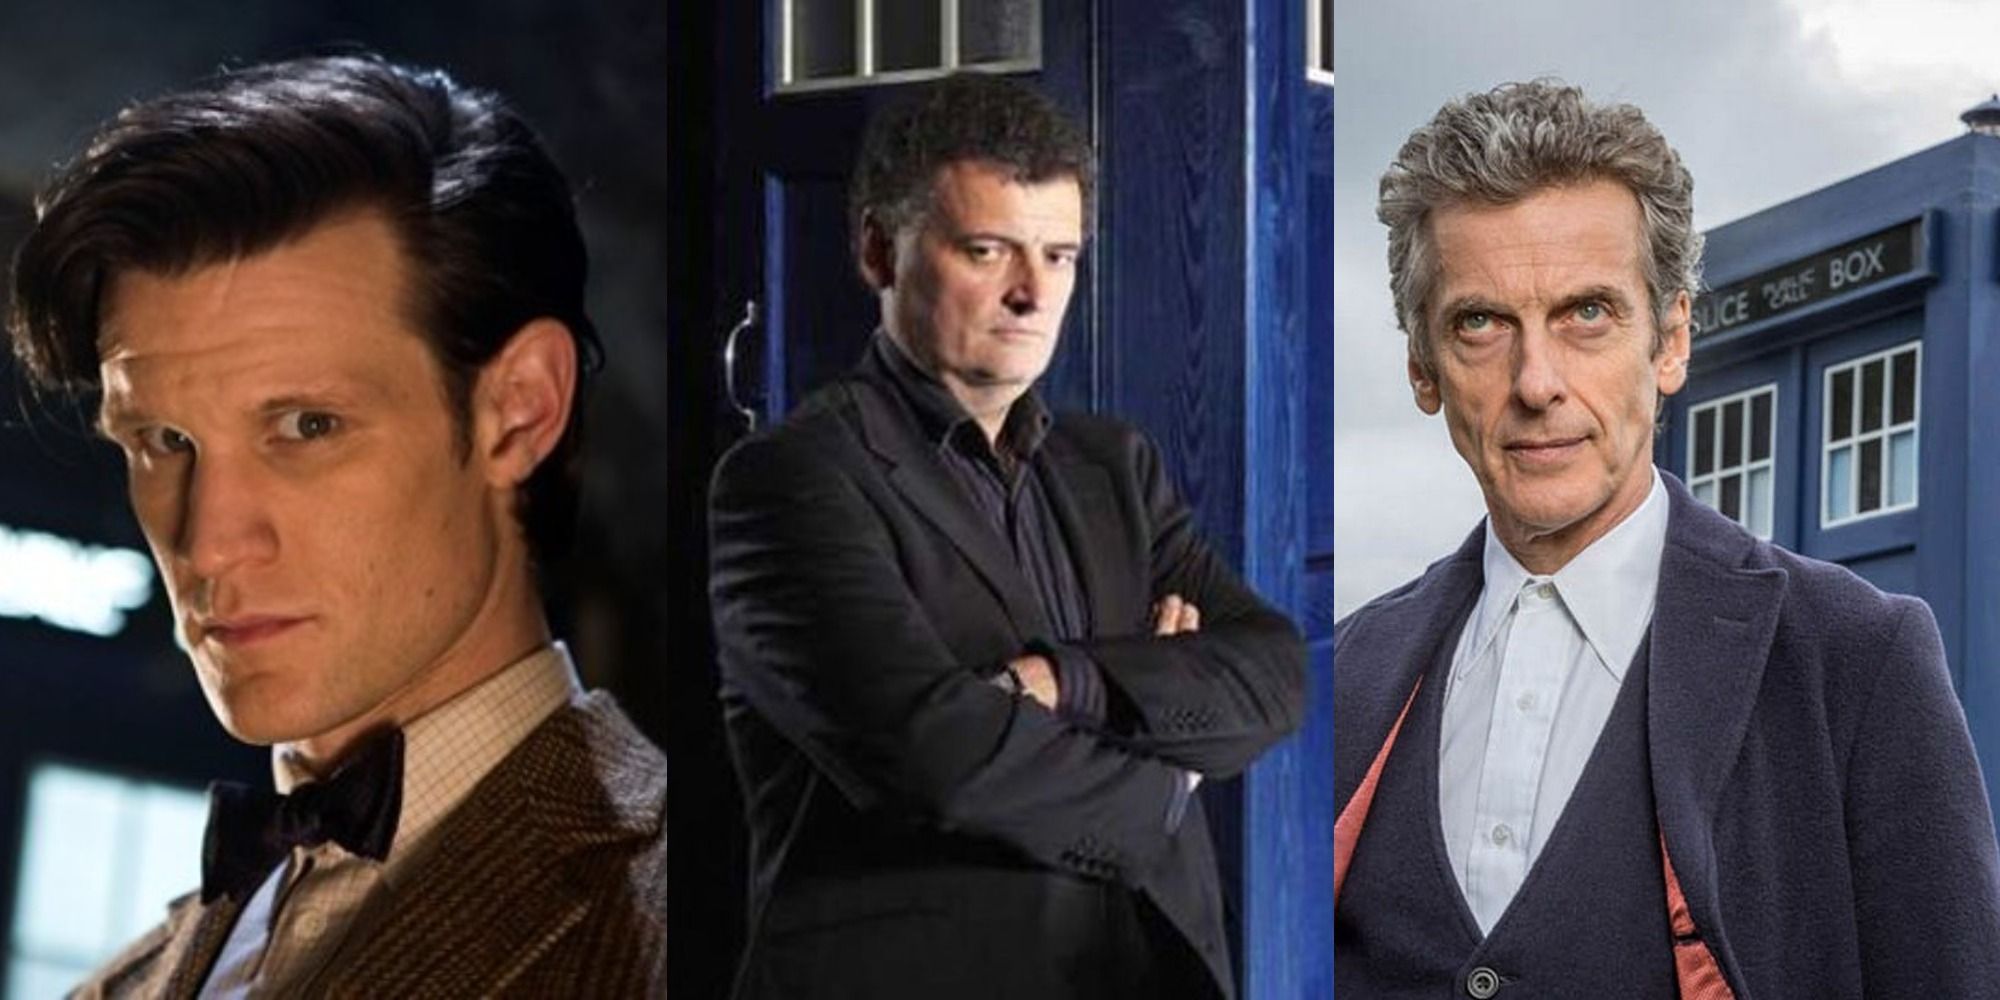 The Doctors and Steven Moffat from Doctor Who